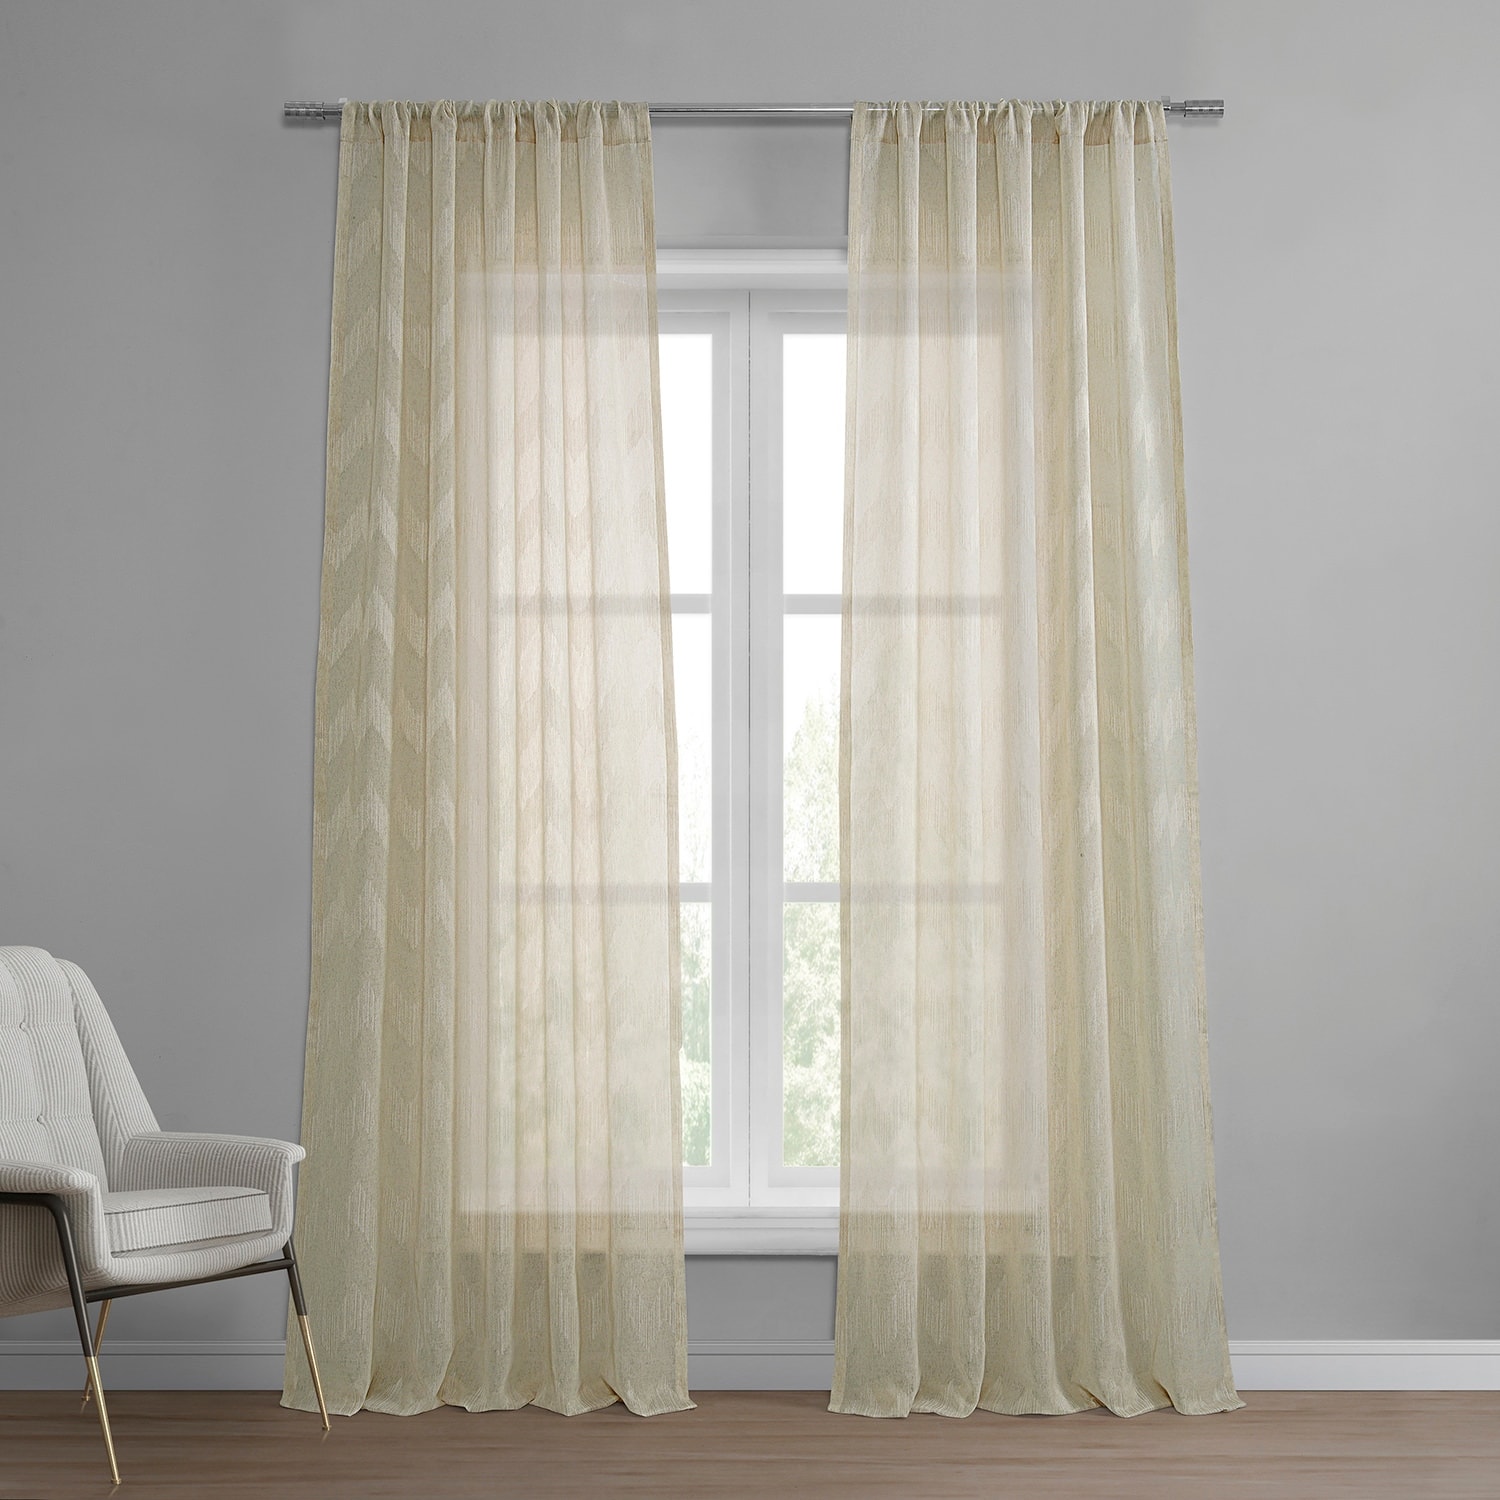 https://ak1.ostkcdn.com/images/products/is/images/direct/11cb10f26a93b5ade063b8166c492d2ad9a9ee4f/Exclusive-Fabrics-Sirius-Patterned-Linen-Sheer-Curtain-%281-Panel%29.jpg